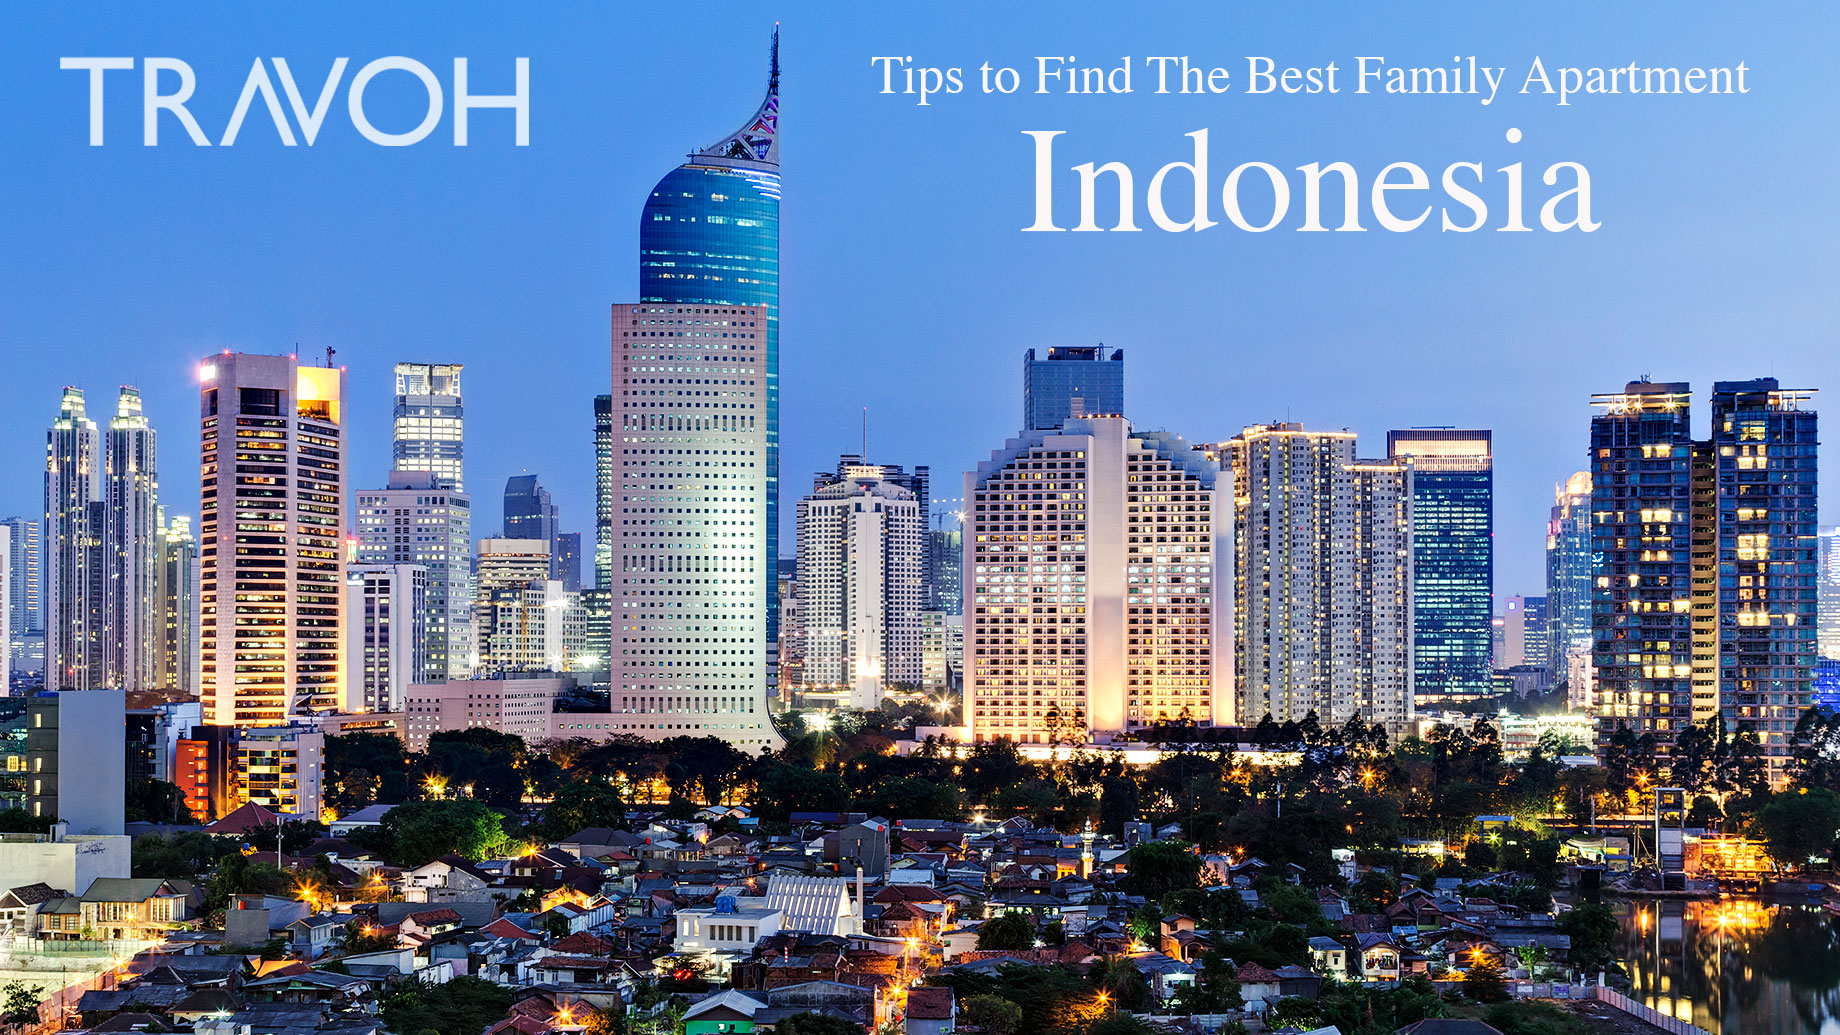 Tips to Find The Best Family Apartment in Indonesia